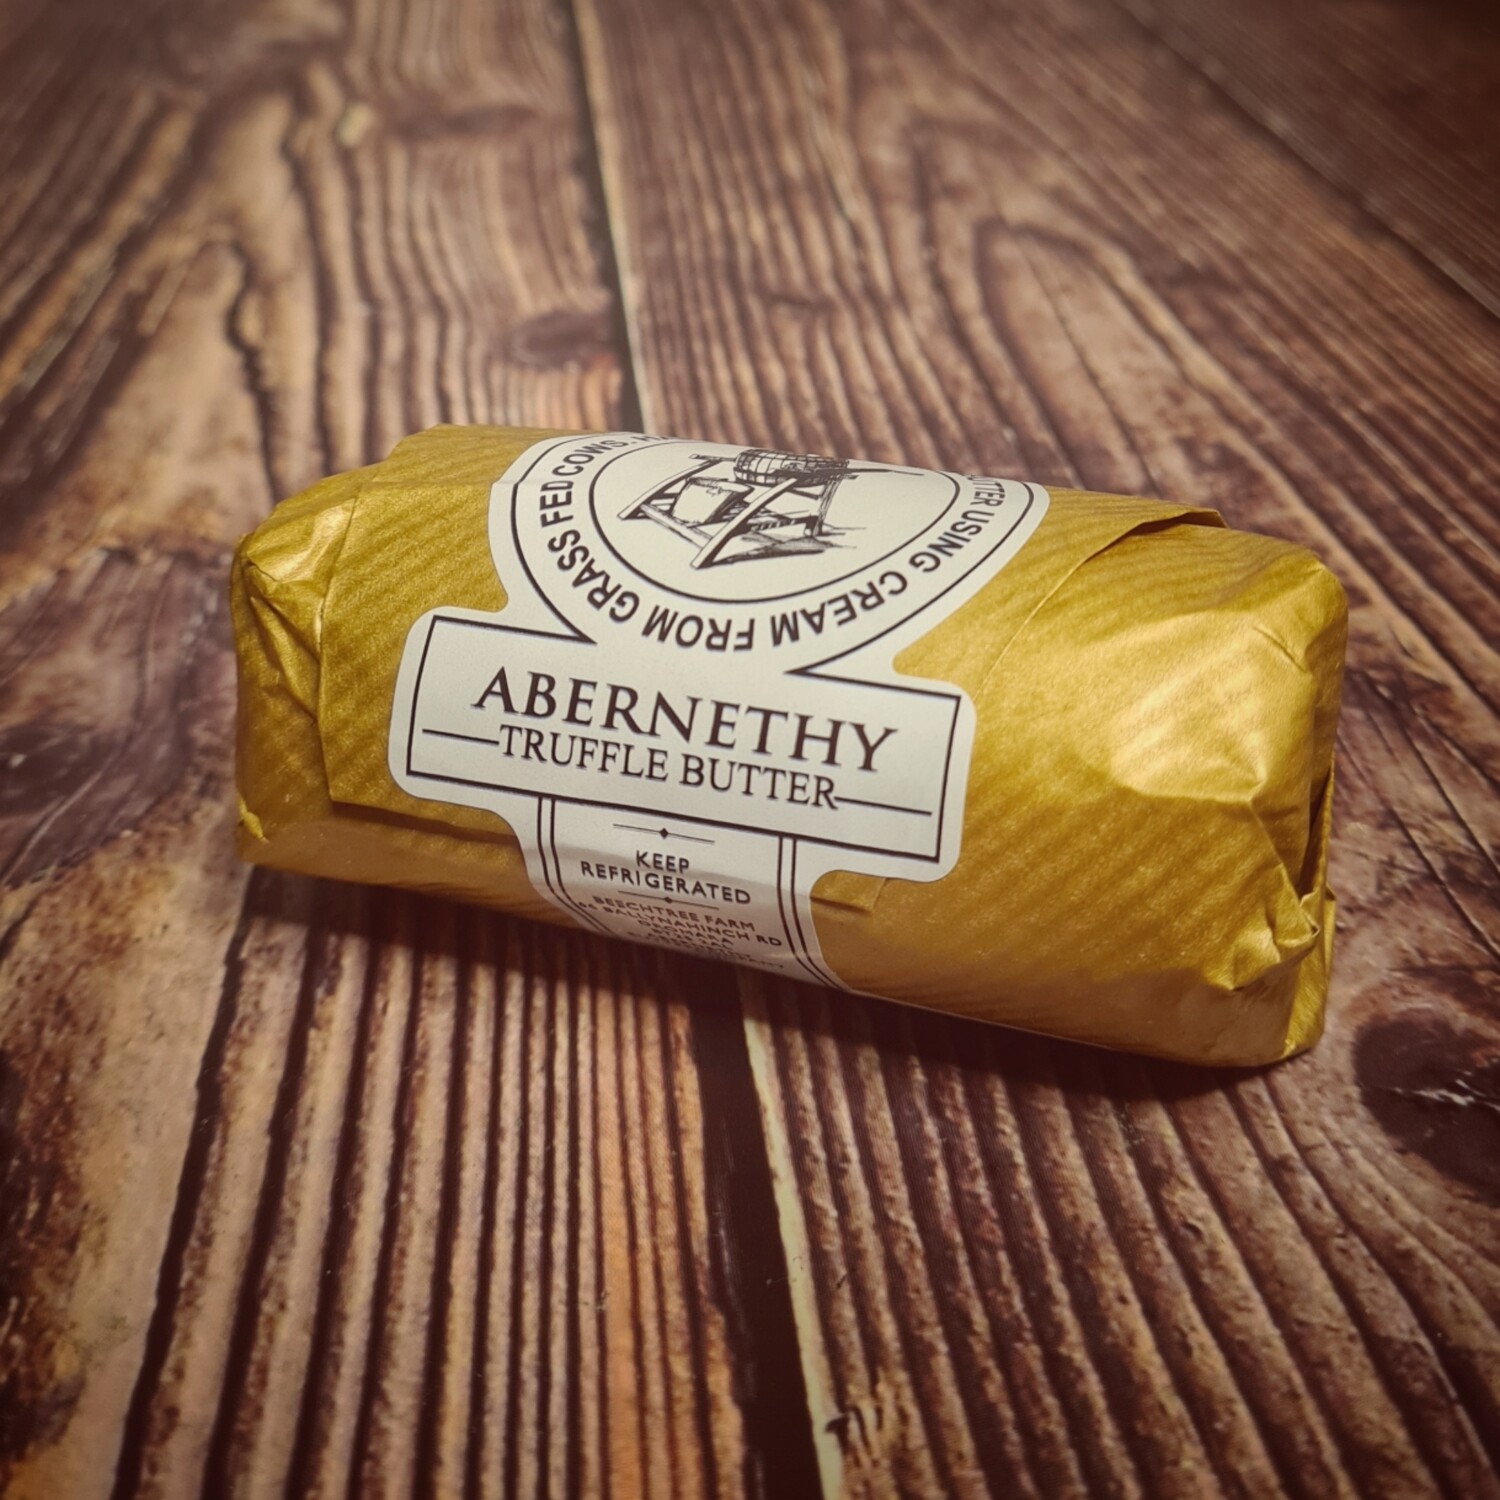 Preorder Abernethy Truffle Butter